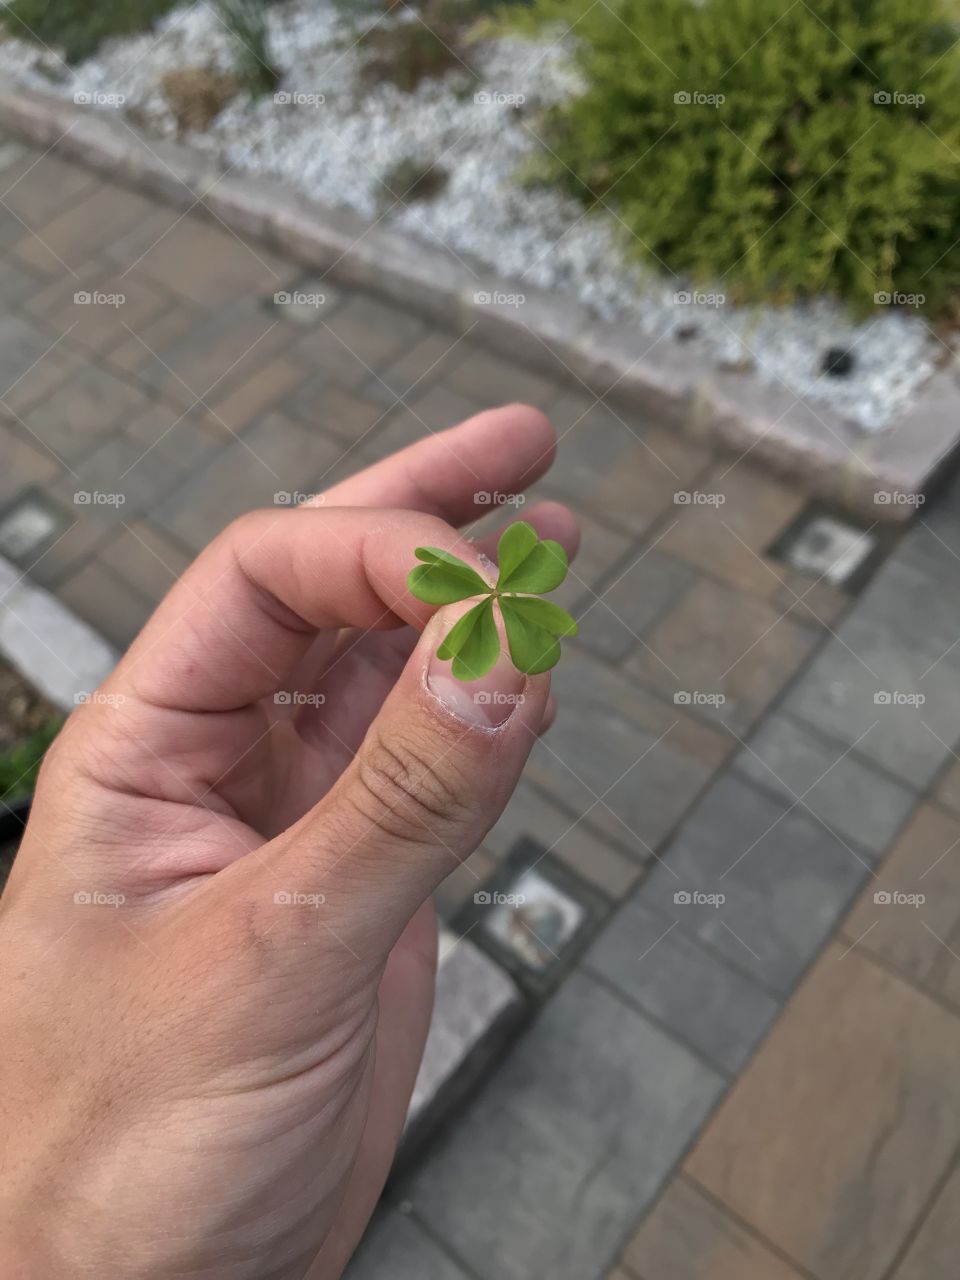 Four leaf clover found by my little sister